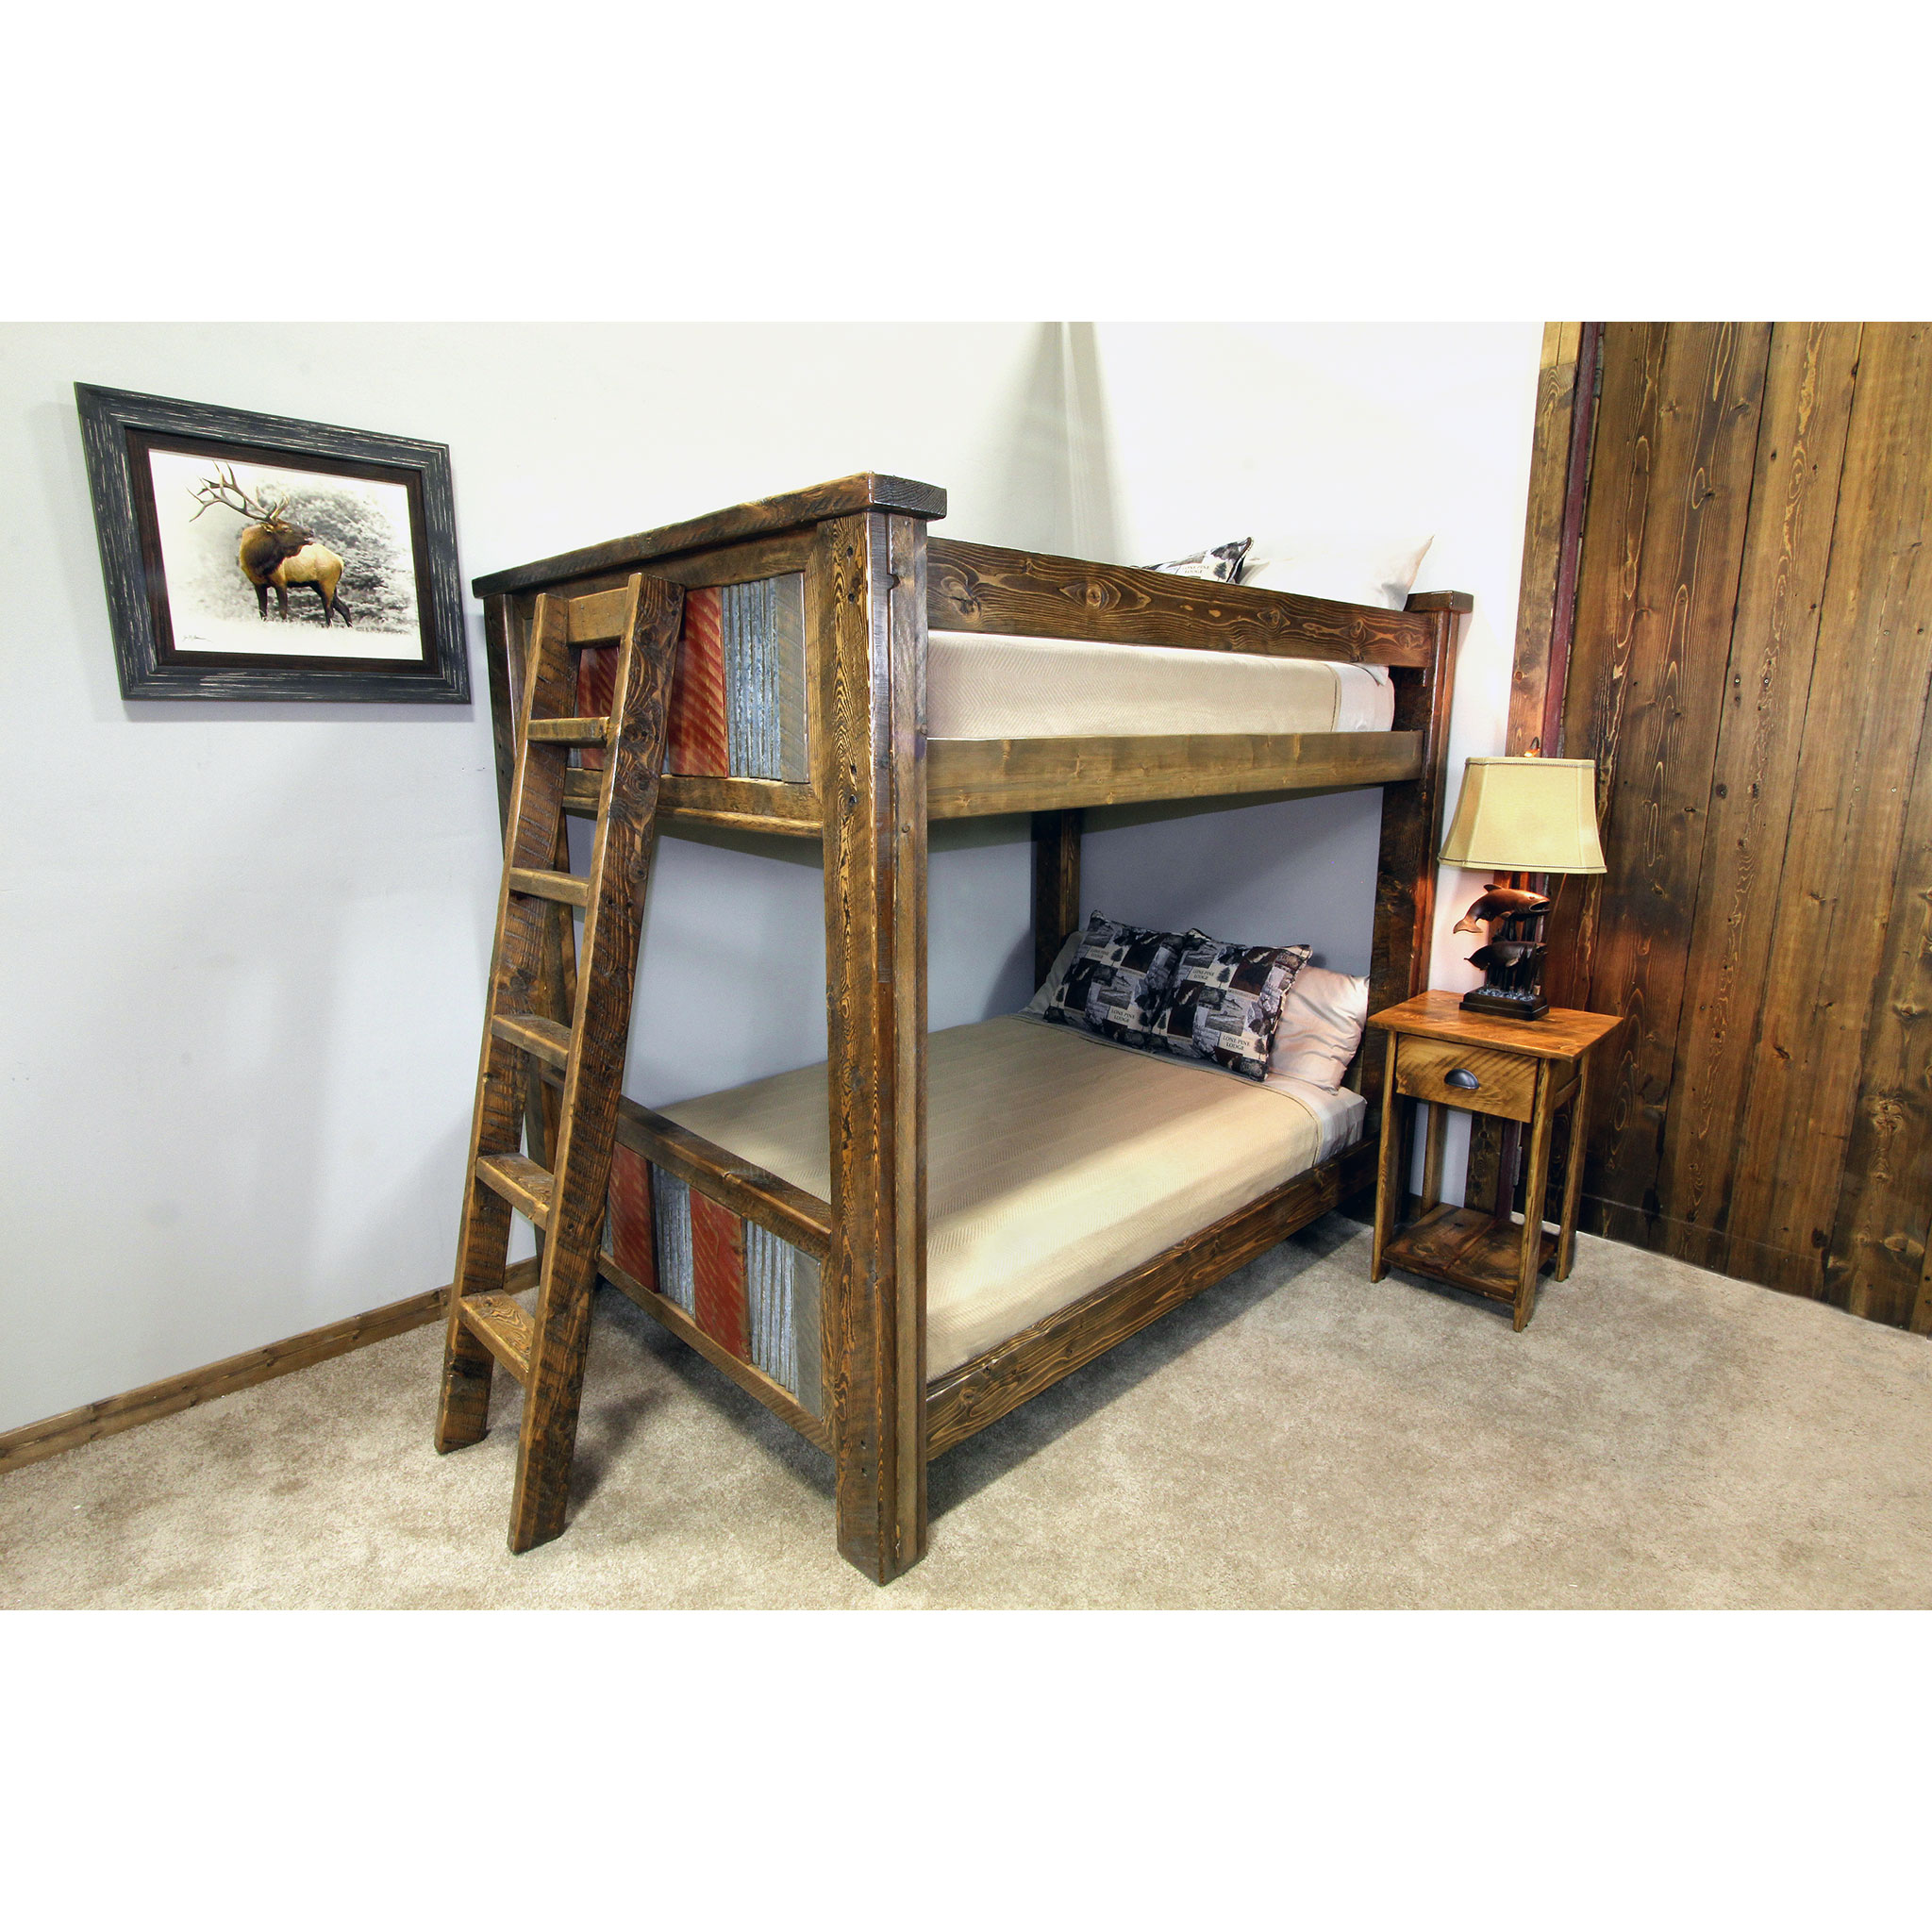 Rustic Metal And Wood Bunk Bed Four, White Reclaimed Wood Bunk Beds